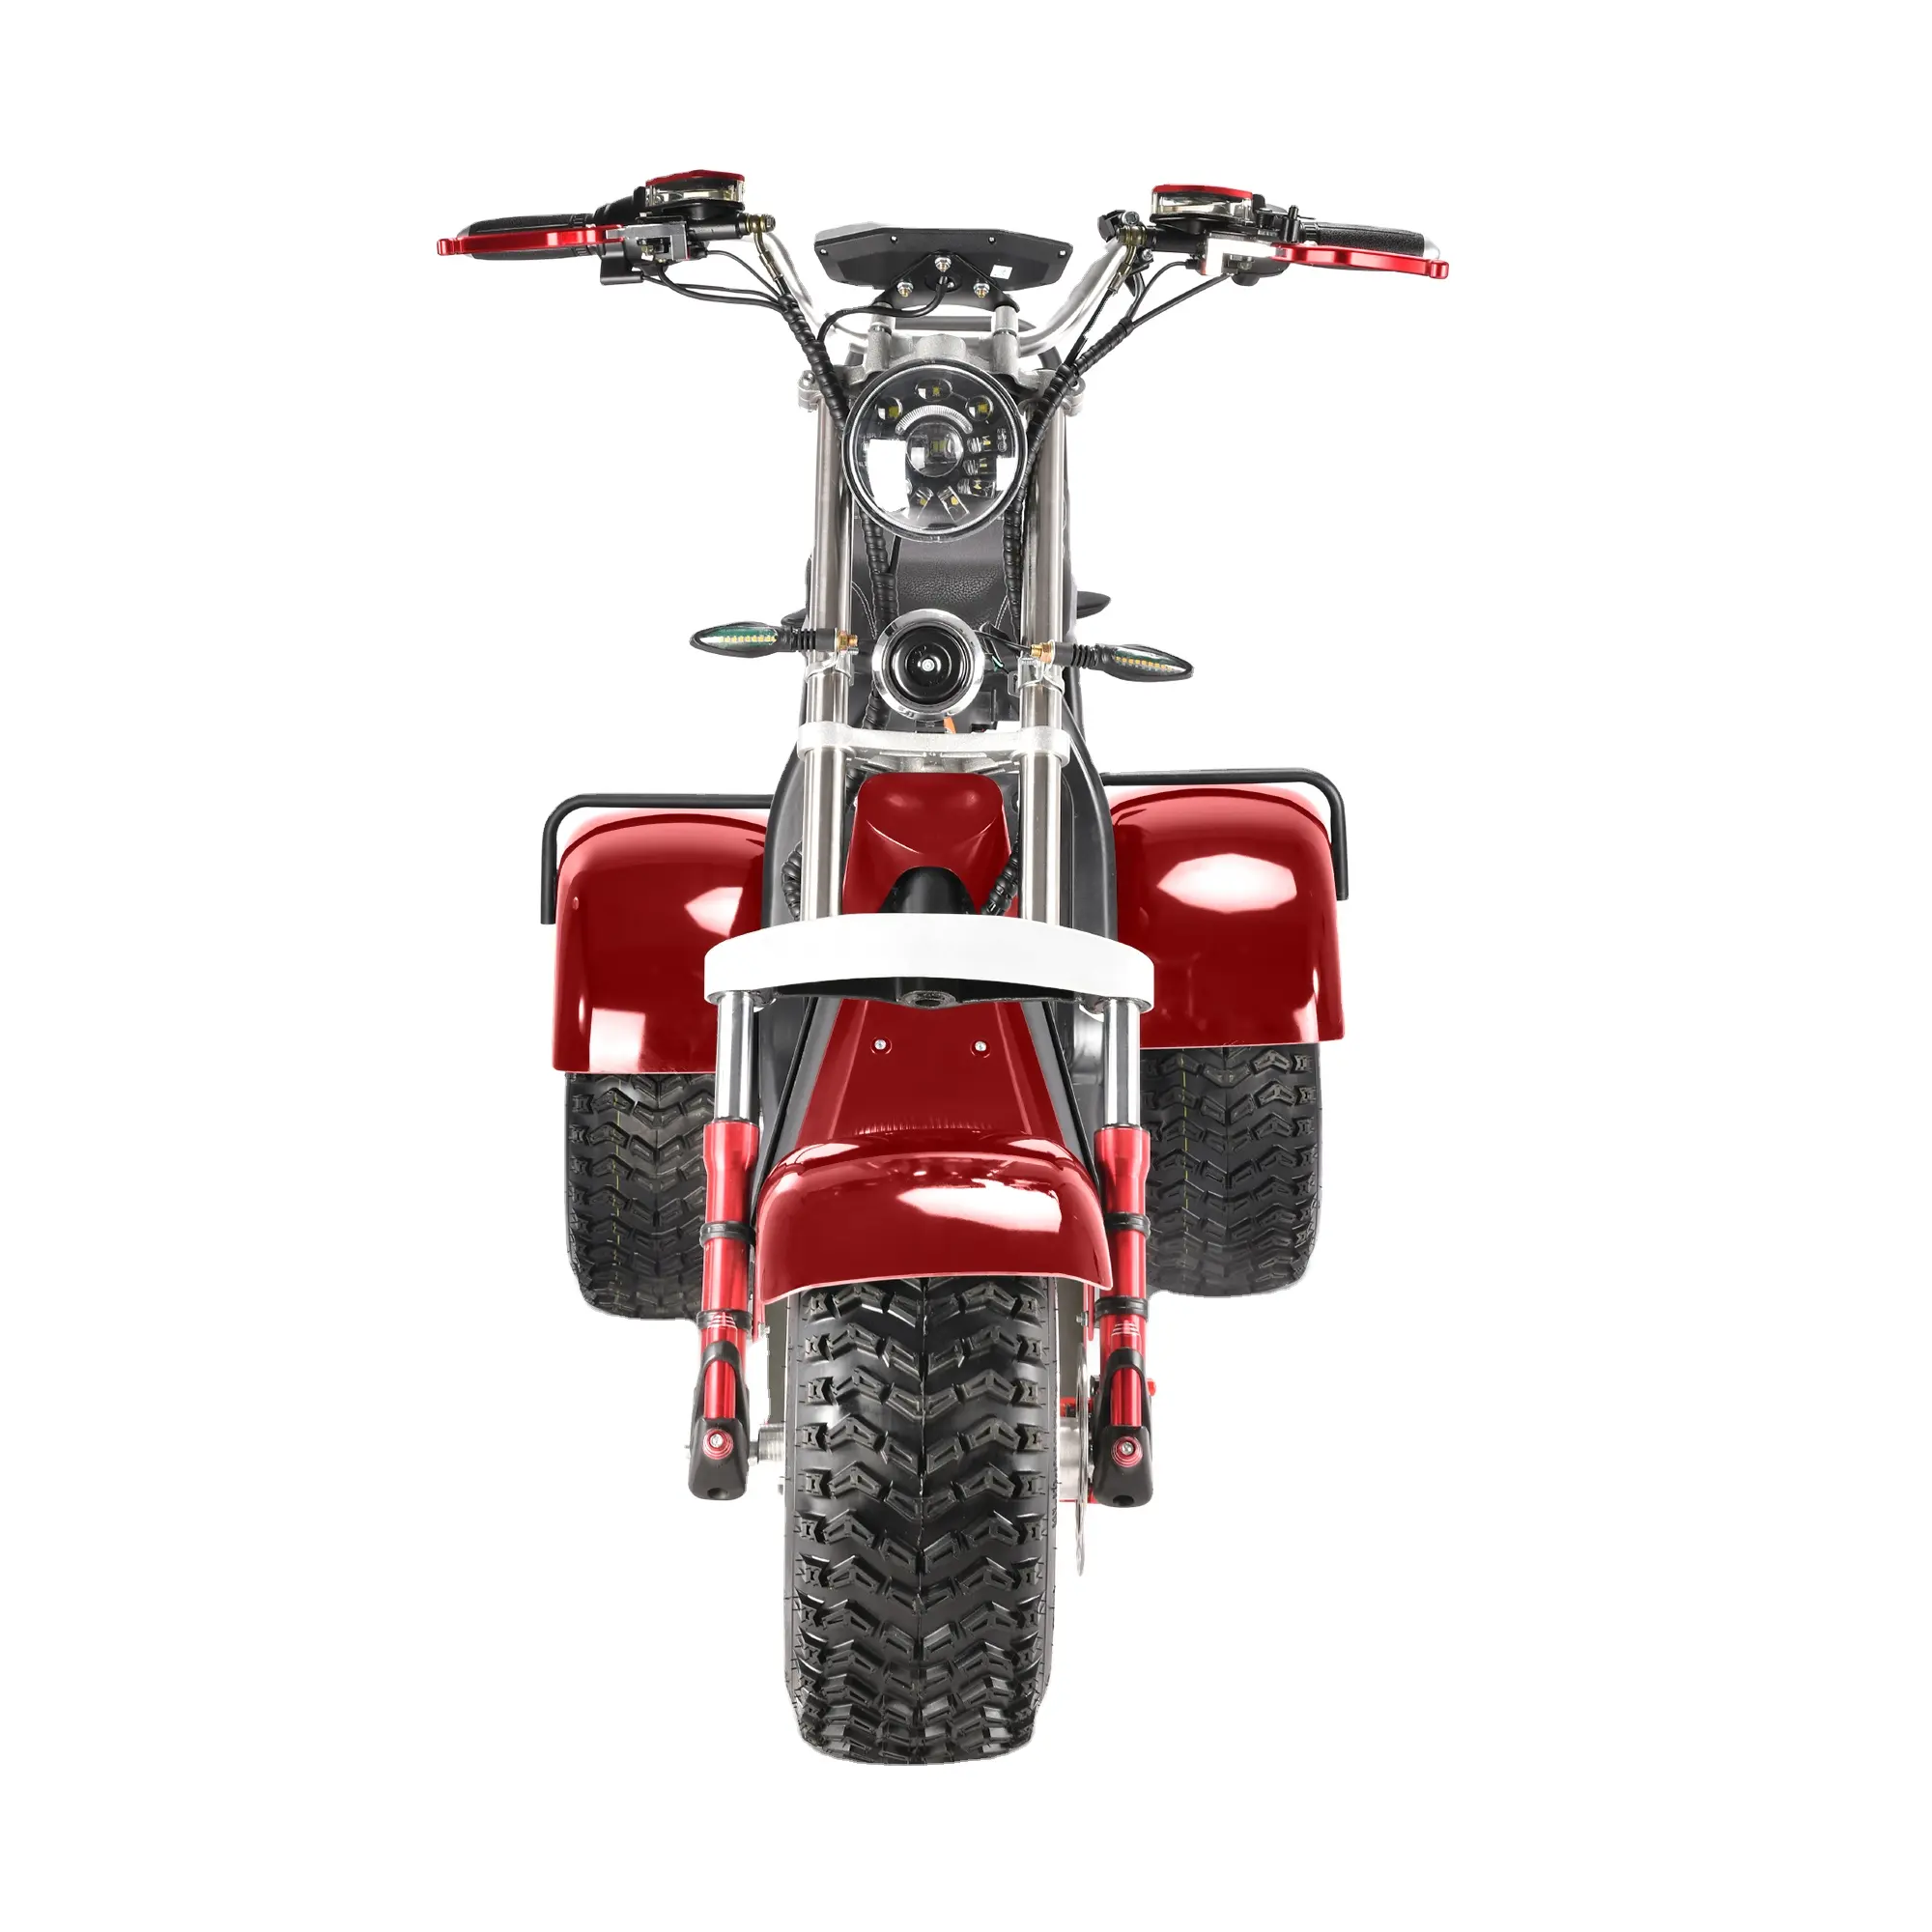 3 wheel tricycles electric bike with eec certification and overseas warehouse 4000W 20AH/40AH battery for sale